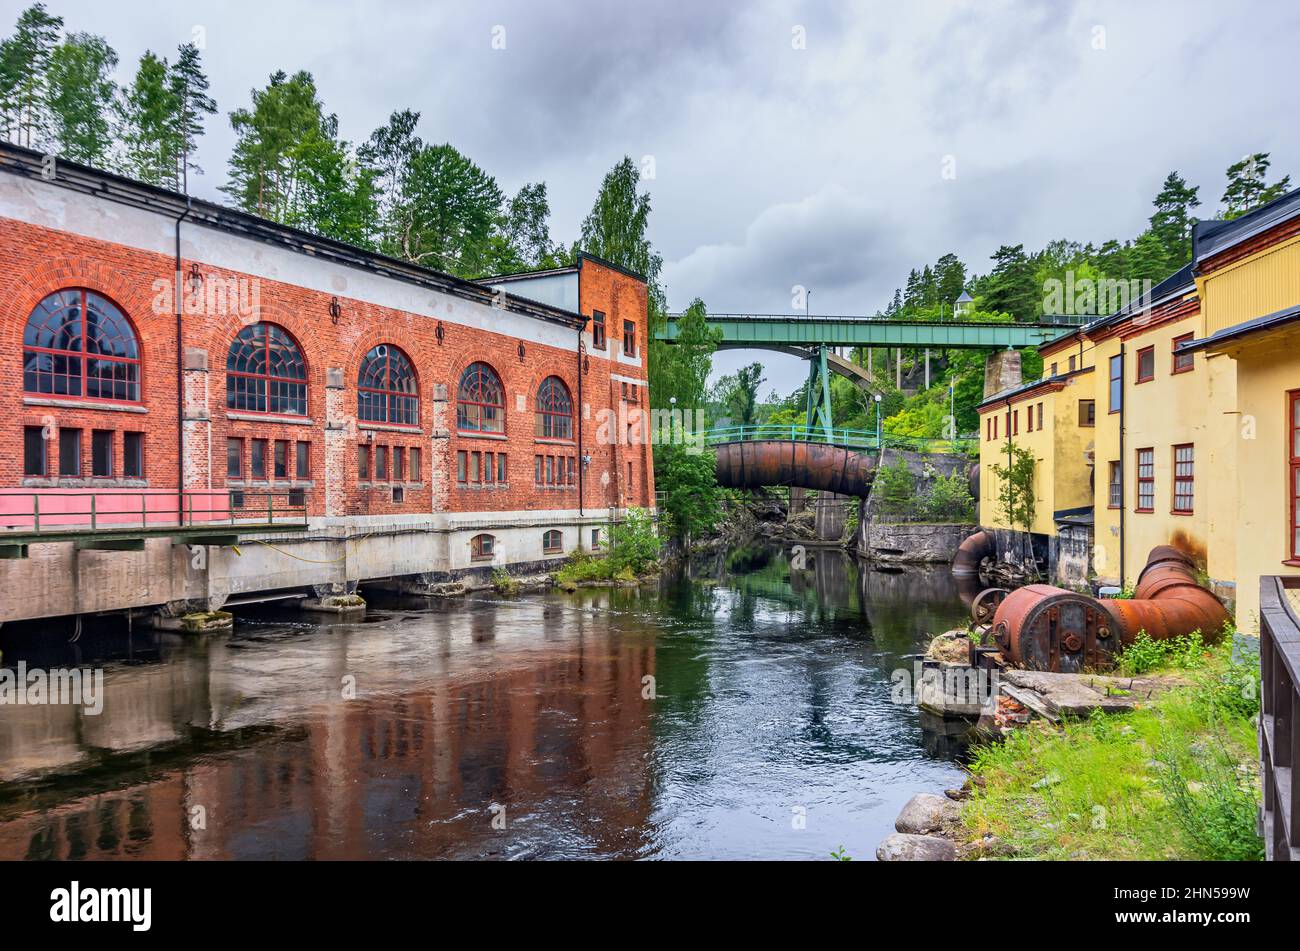 Historical industrial architecture, today part of the Dalsland Centre at the Dalsland Canal in Haverud, Dalsland, Västra Götalands län, Sweden. Stock Photo